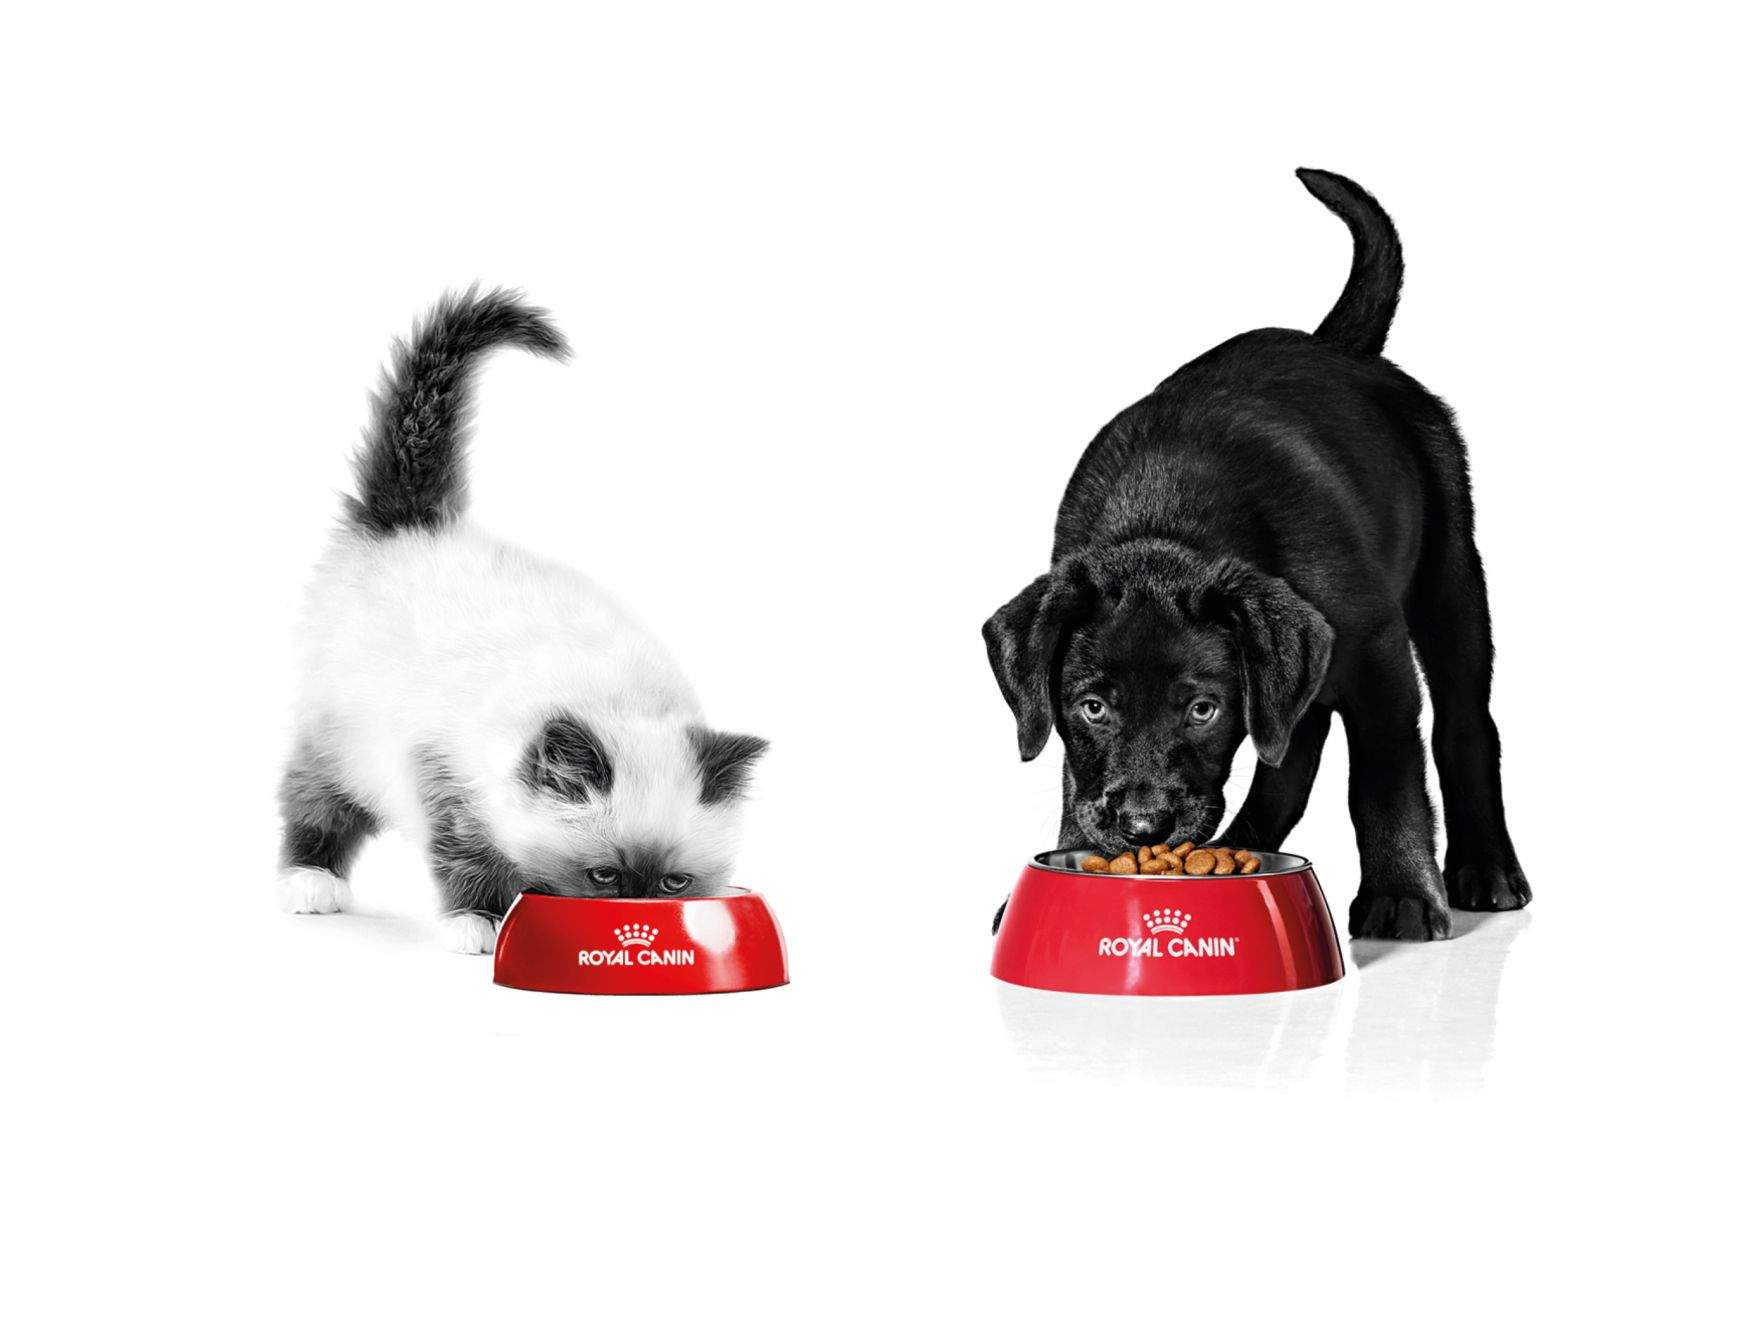 Kitten & Puppy eating in a Royal Canin bowl